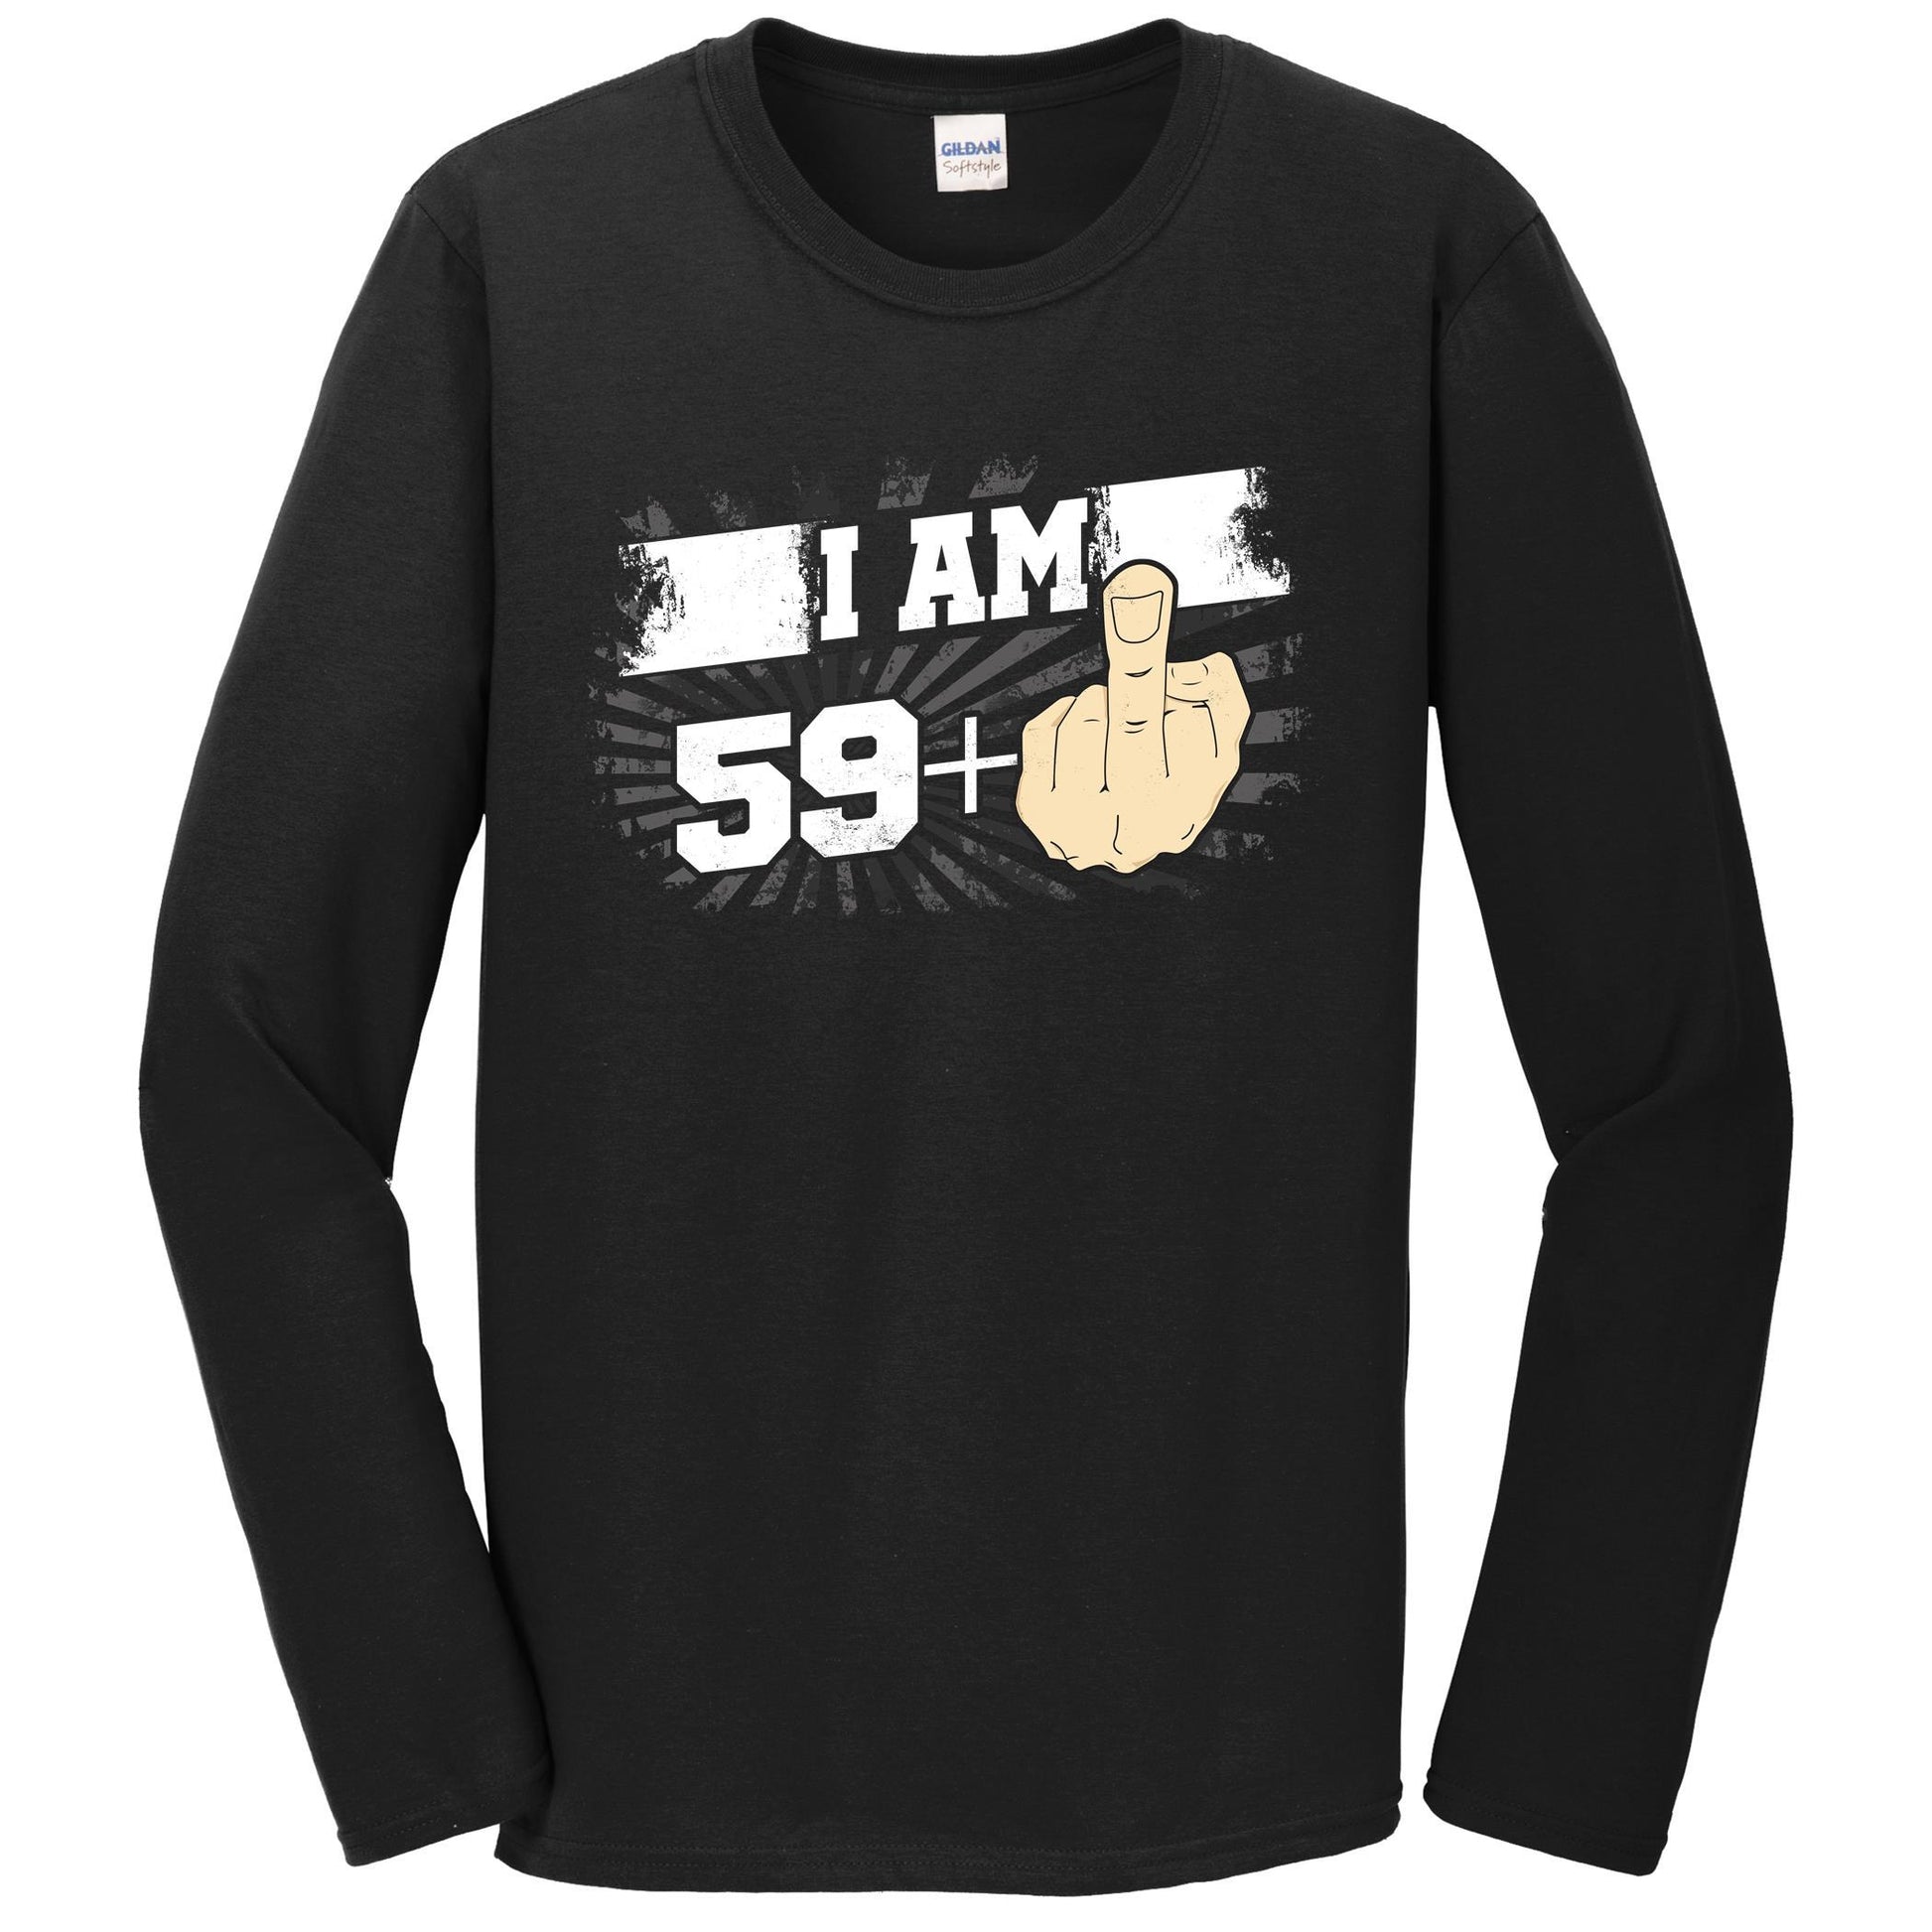 60th Birthday Shirt For Men - I Am 59 Plus Middle Finger 60 Years Old Long Sleeve T-Shirt